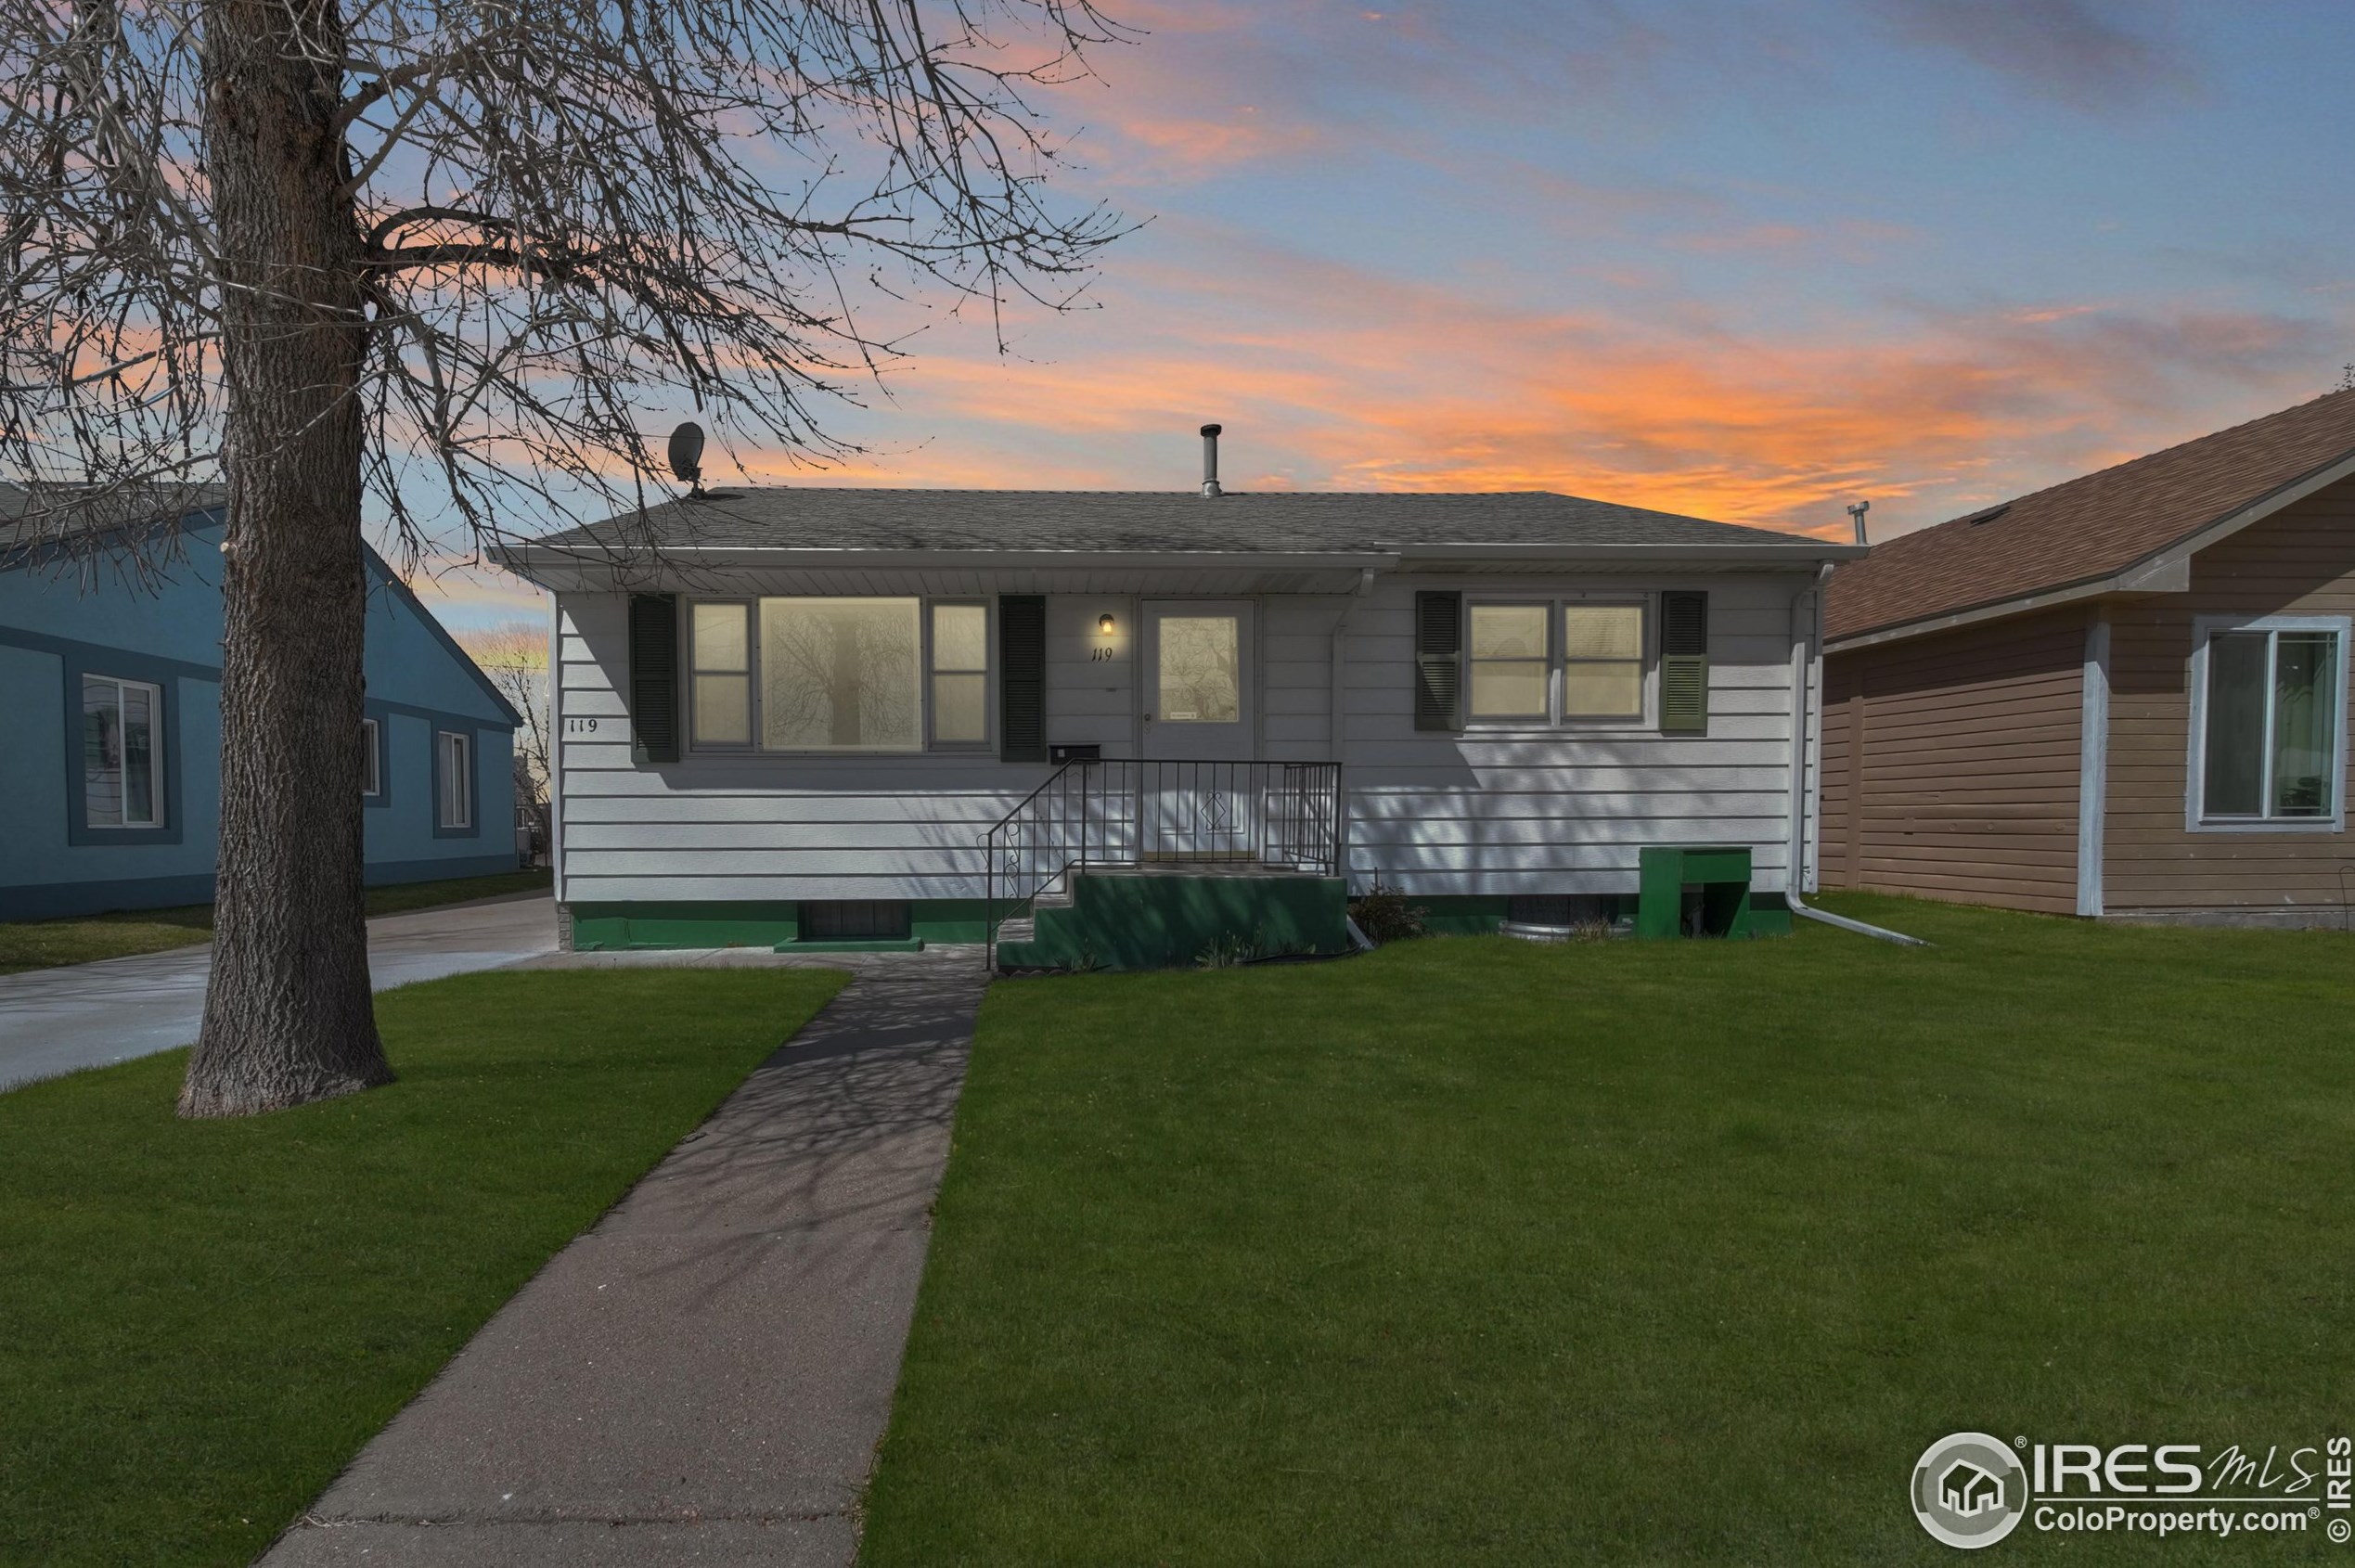 119 Maple St, Fort Morgan, CO 80701